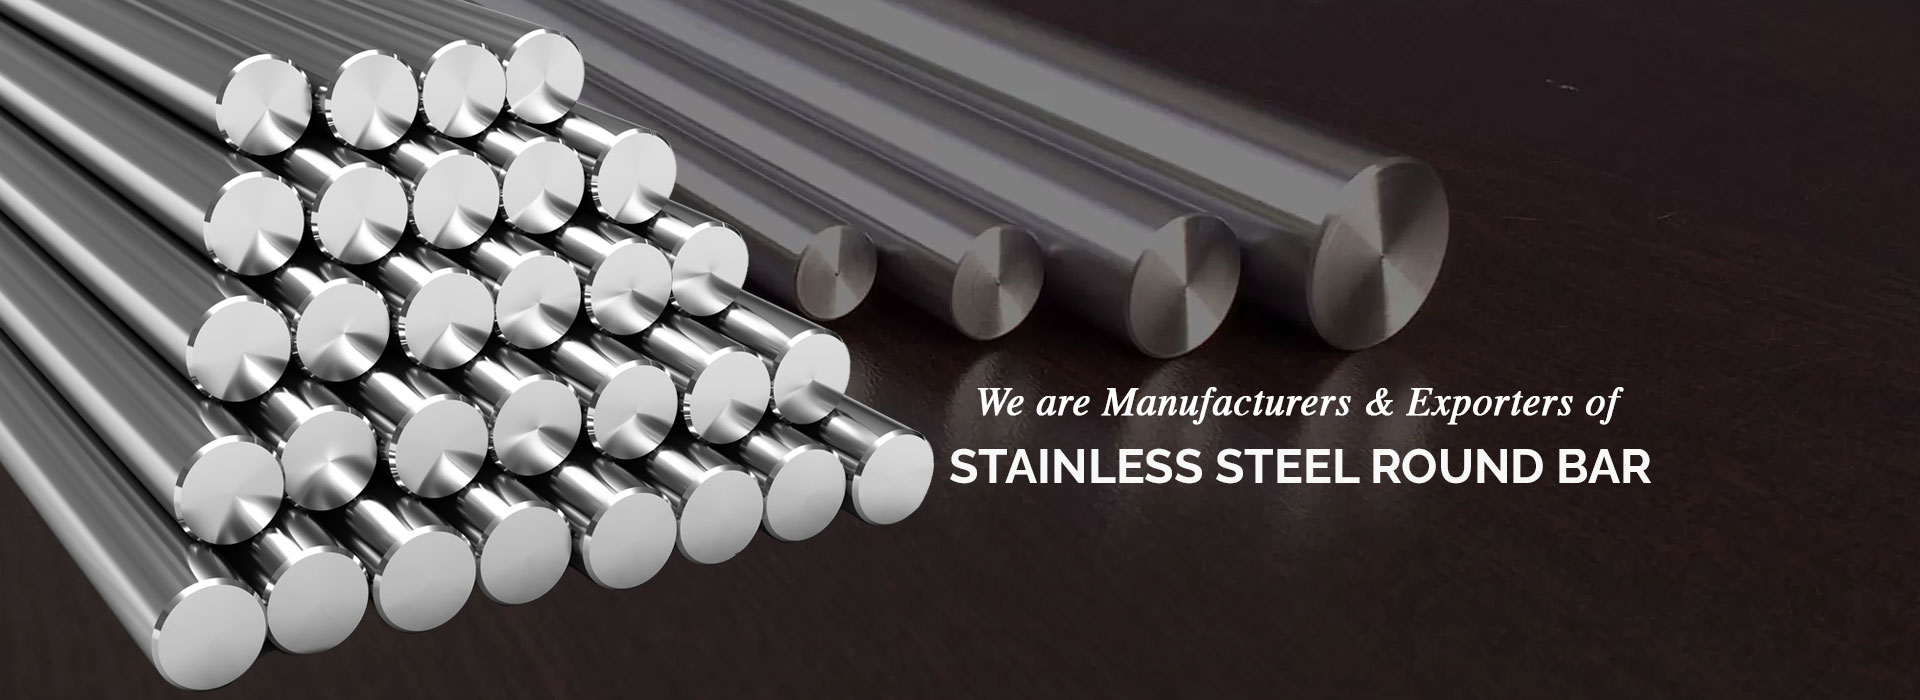 Stainless Steel Round Bar Manufacturers in Oman